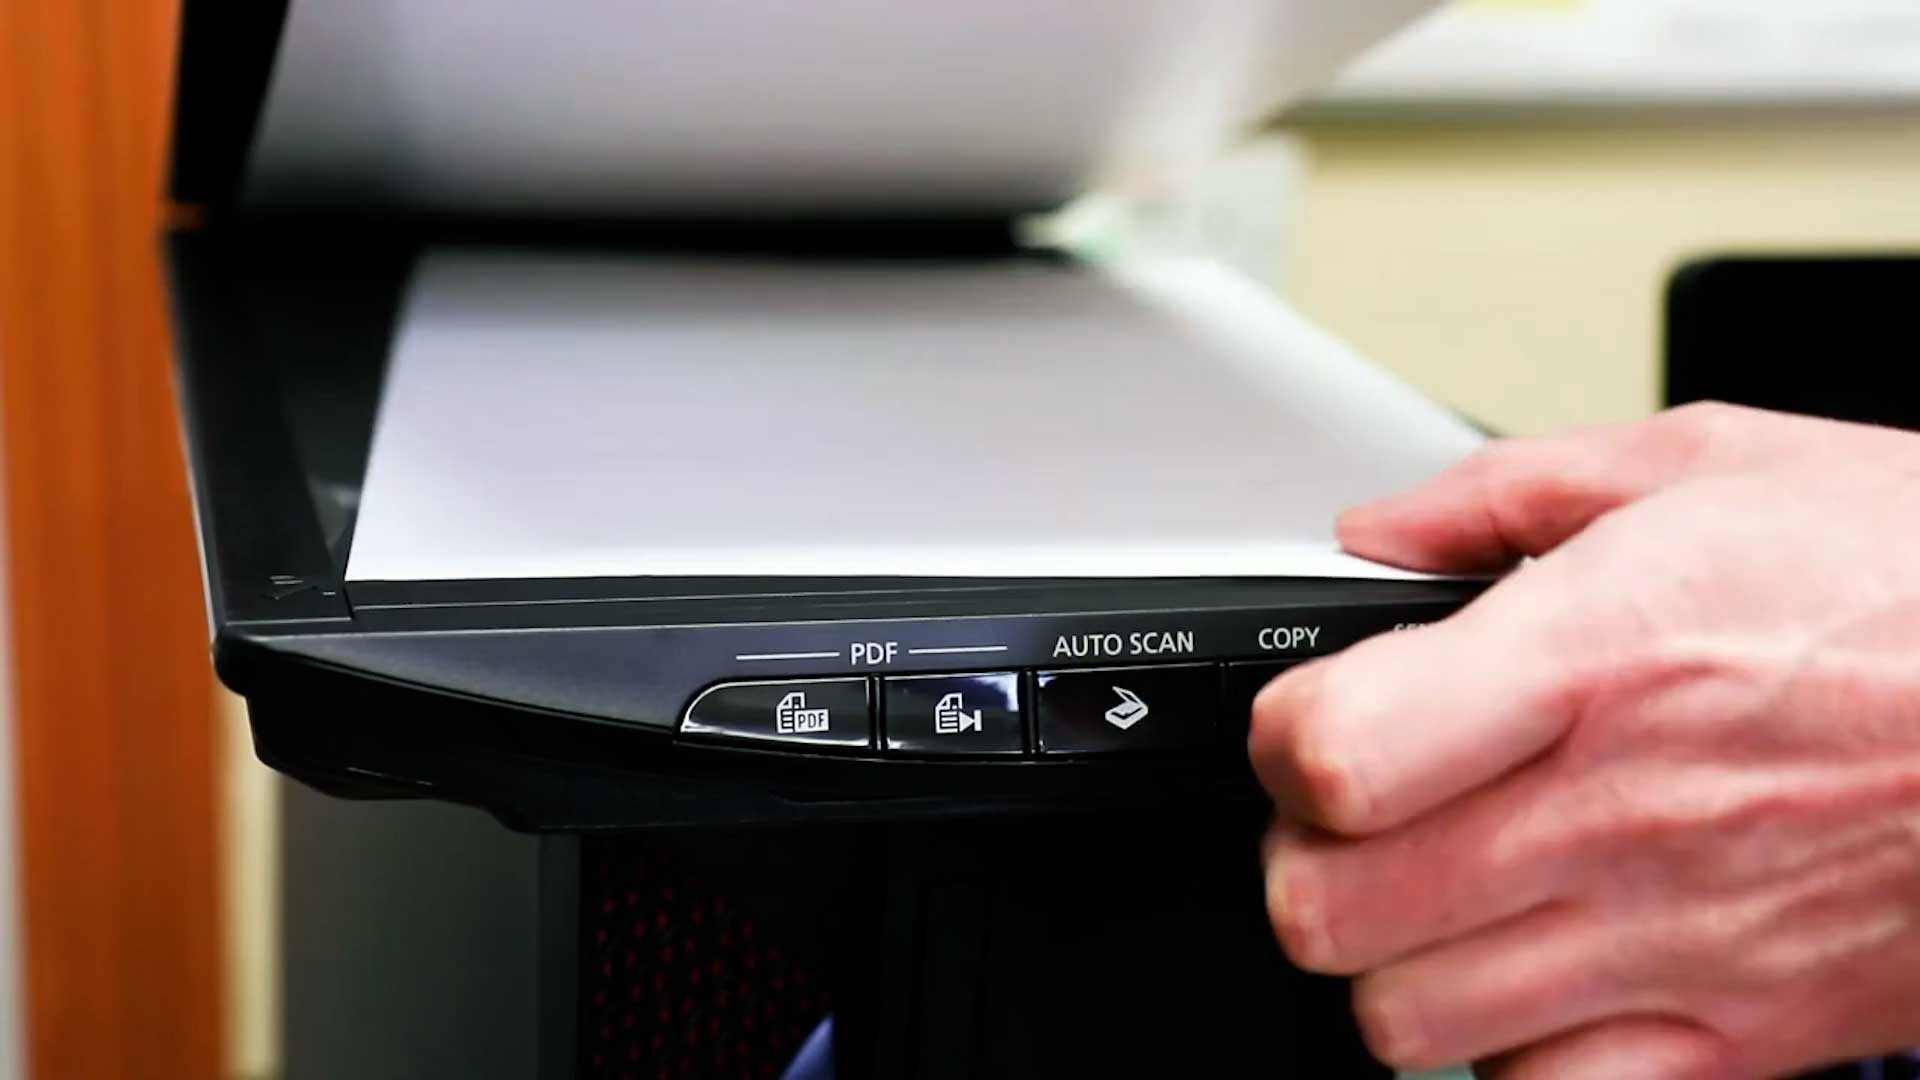 Person placing a document in a scanner.